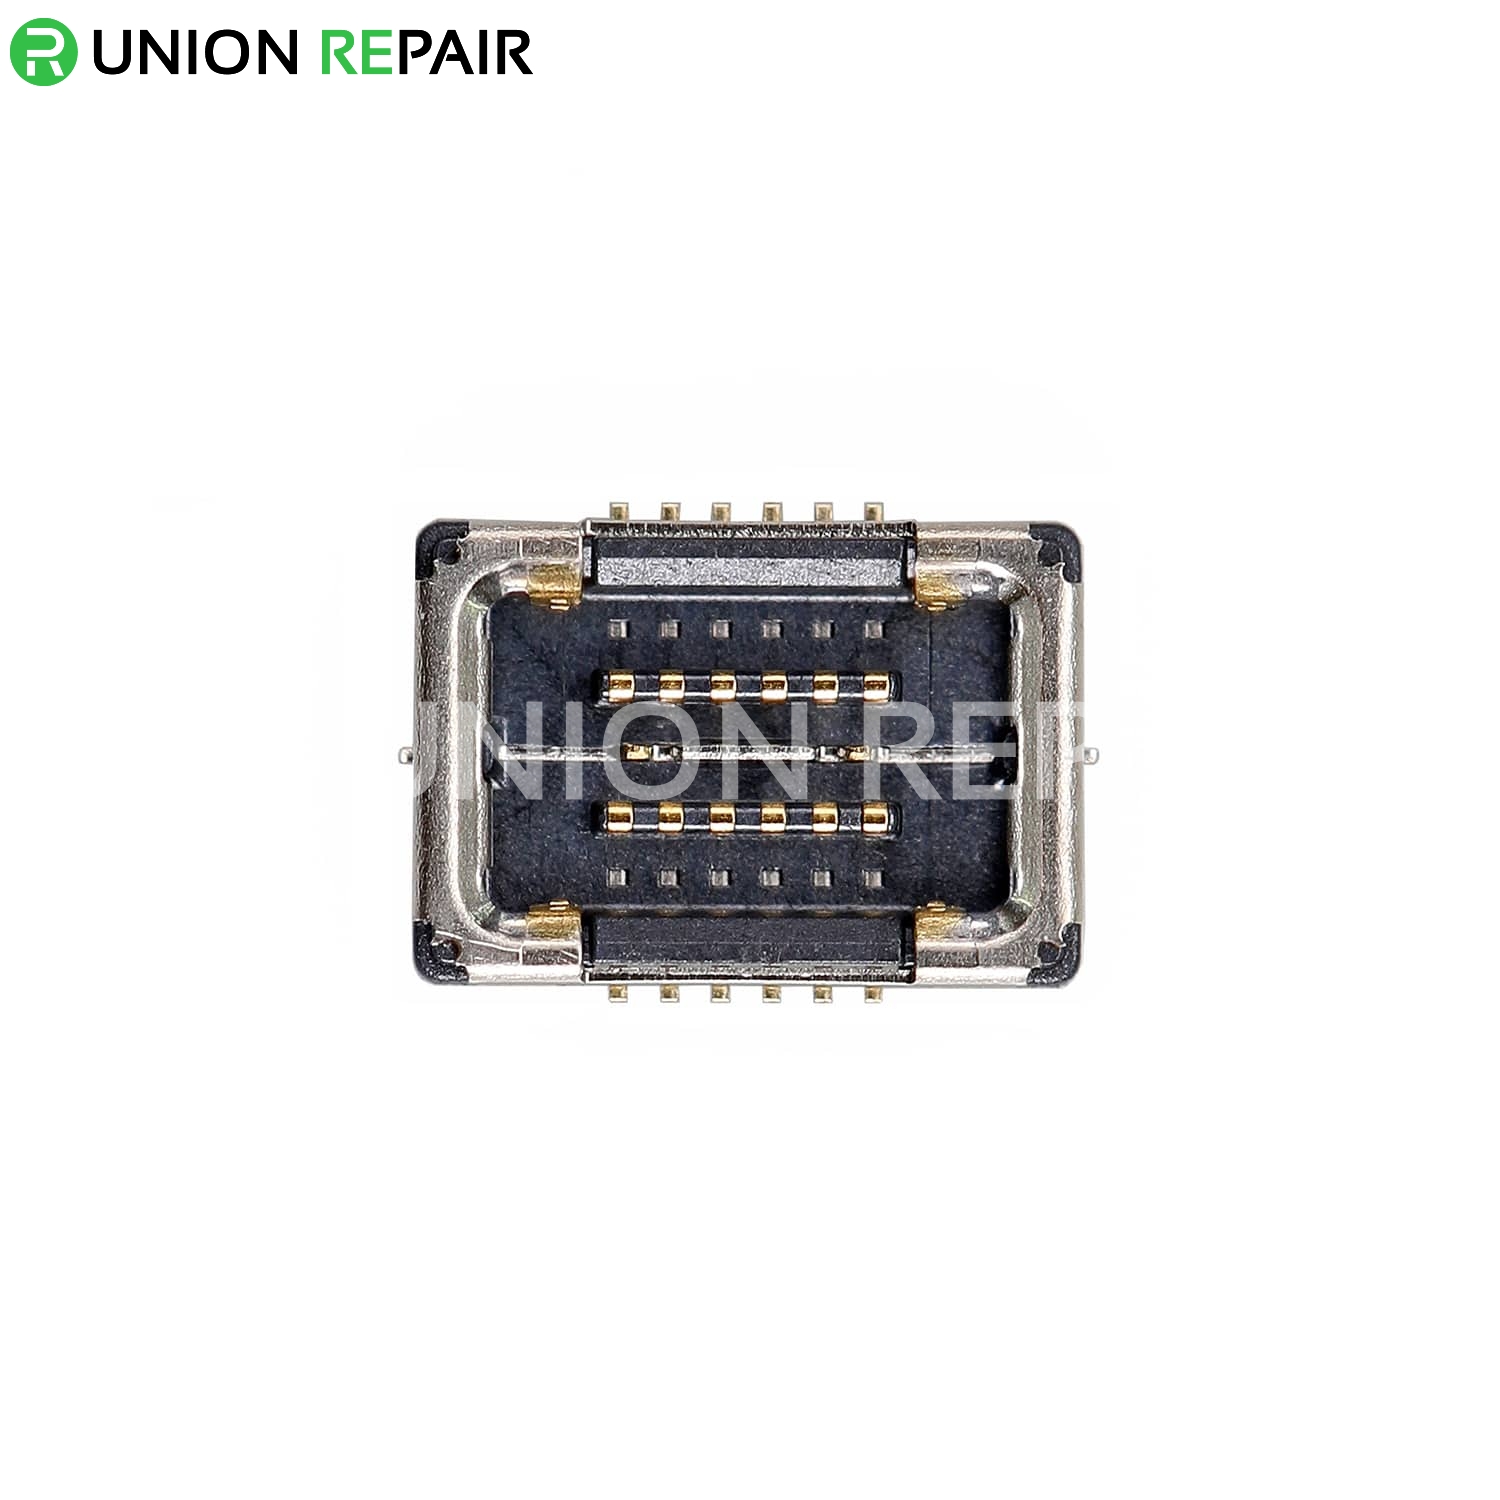 Replacement for iPhone X WLAN WiFi Antenna Connector Port Onboard